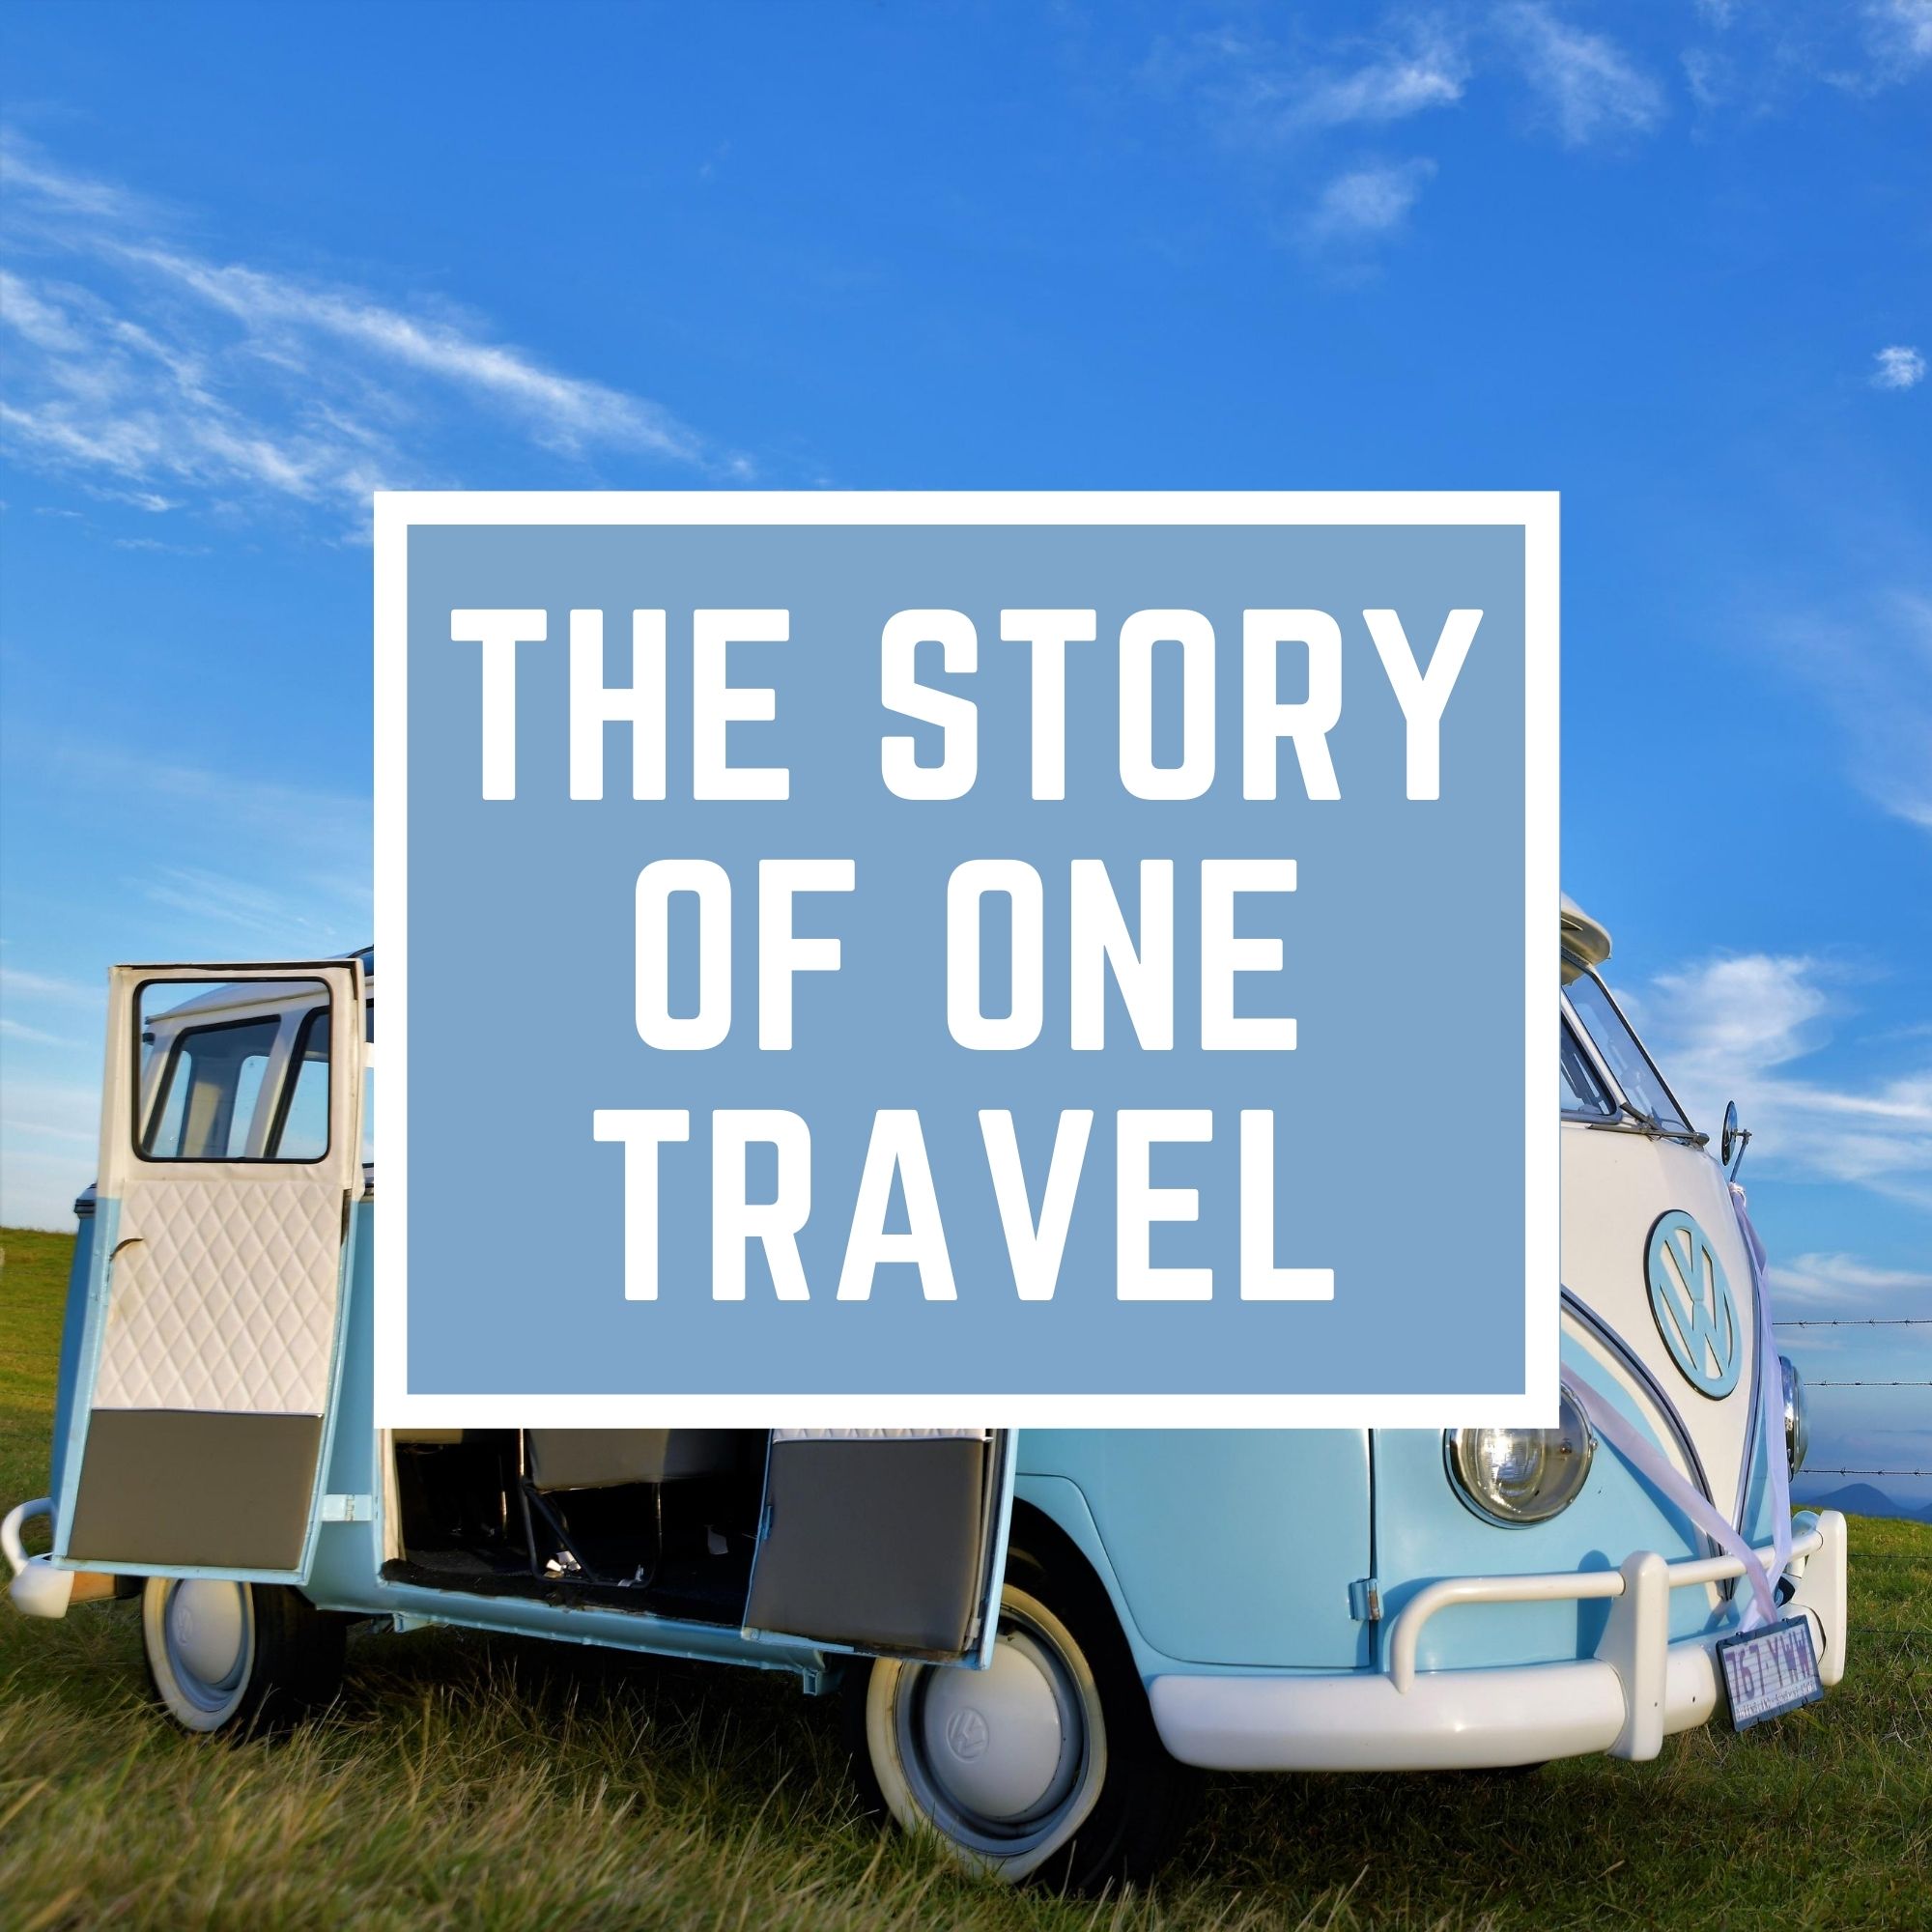 The Story of One Travel